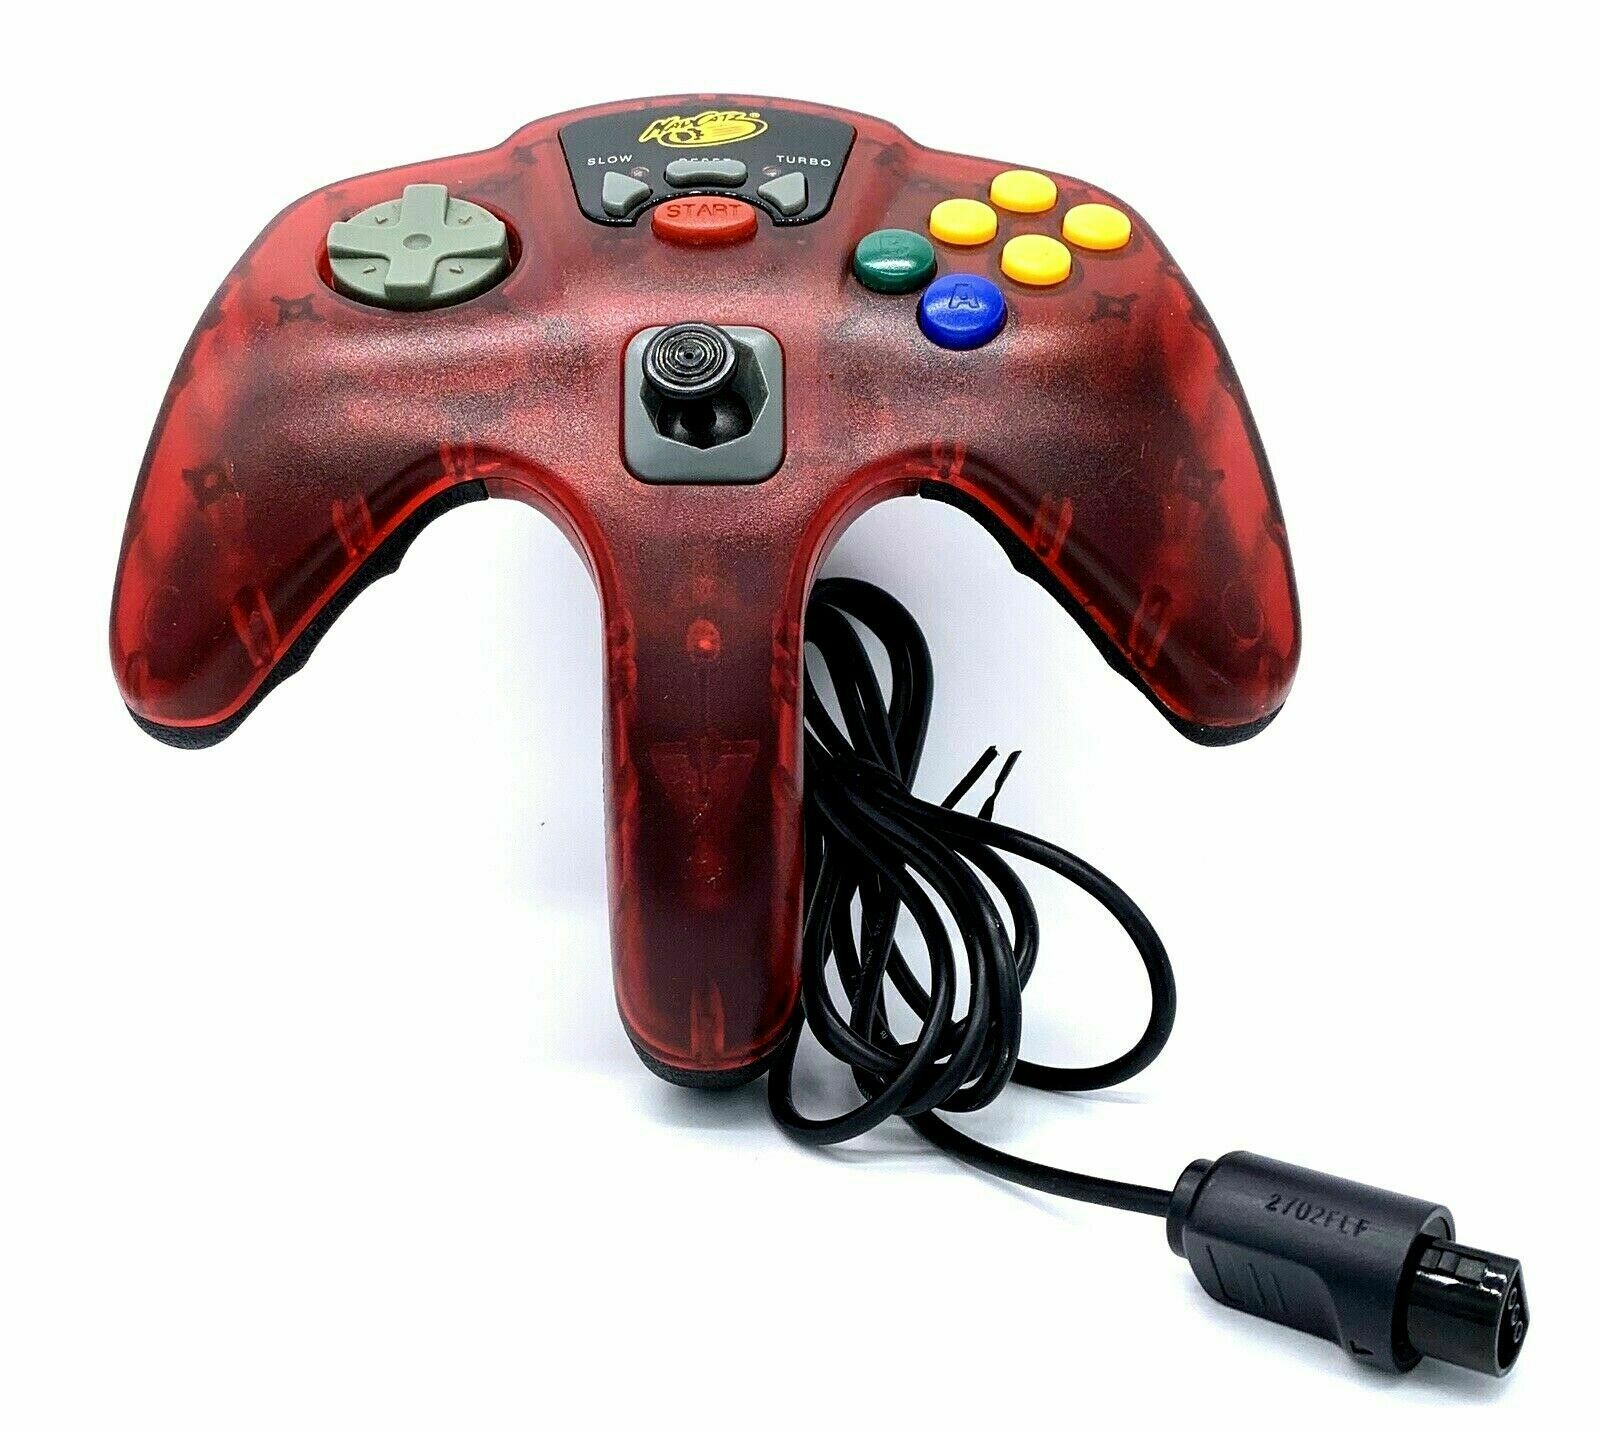 N64: CONTROLLER - GENERIC MADCATS - SLO / TURBO - VARIOUS COLORS (USED)